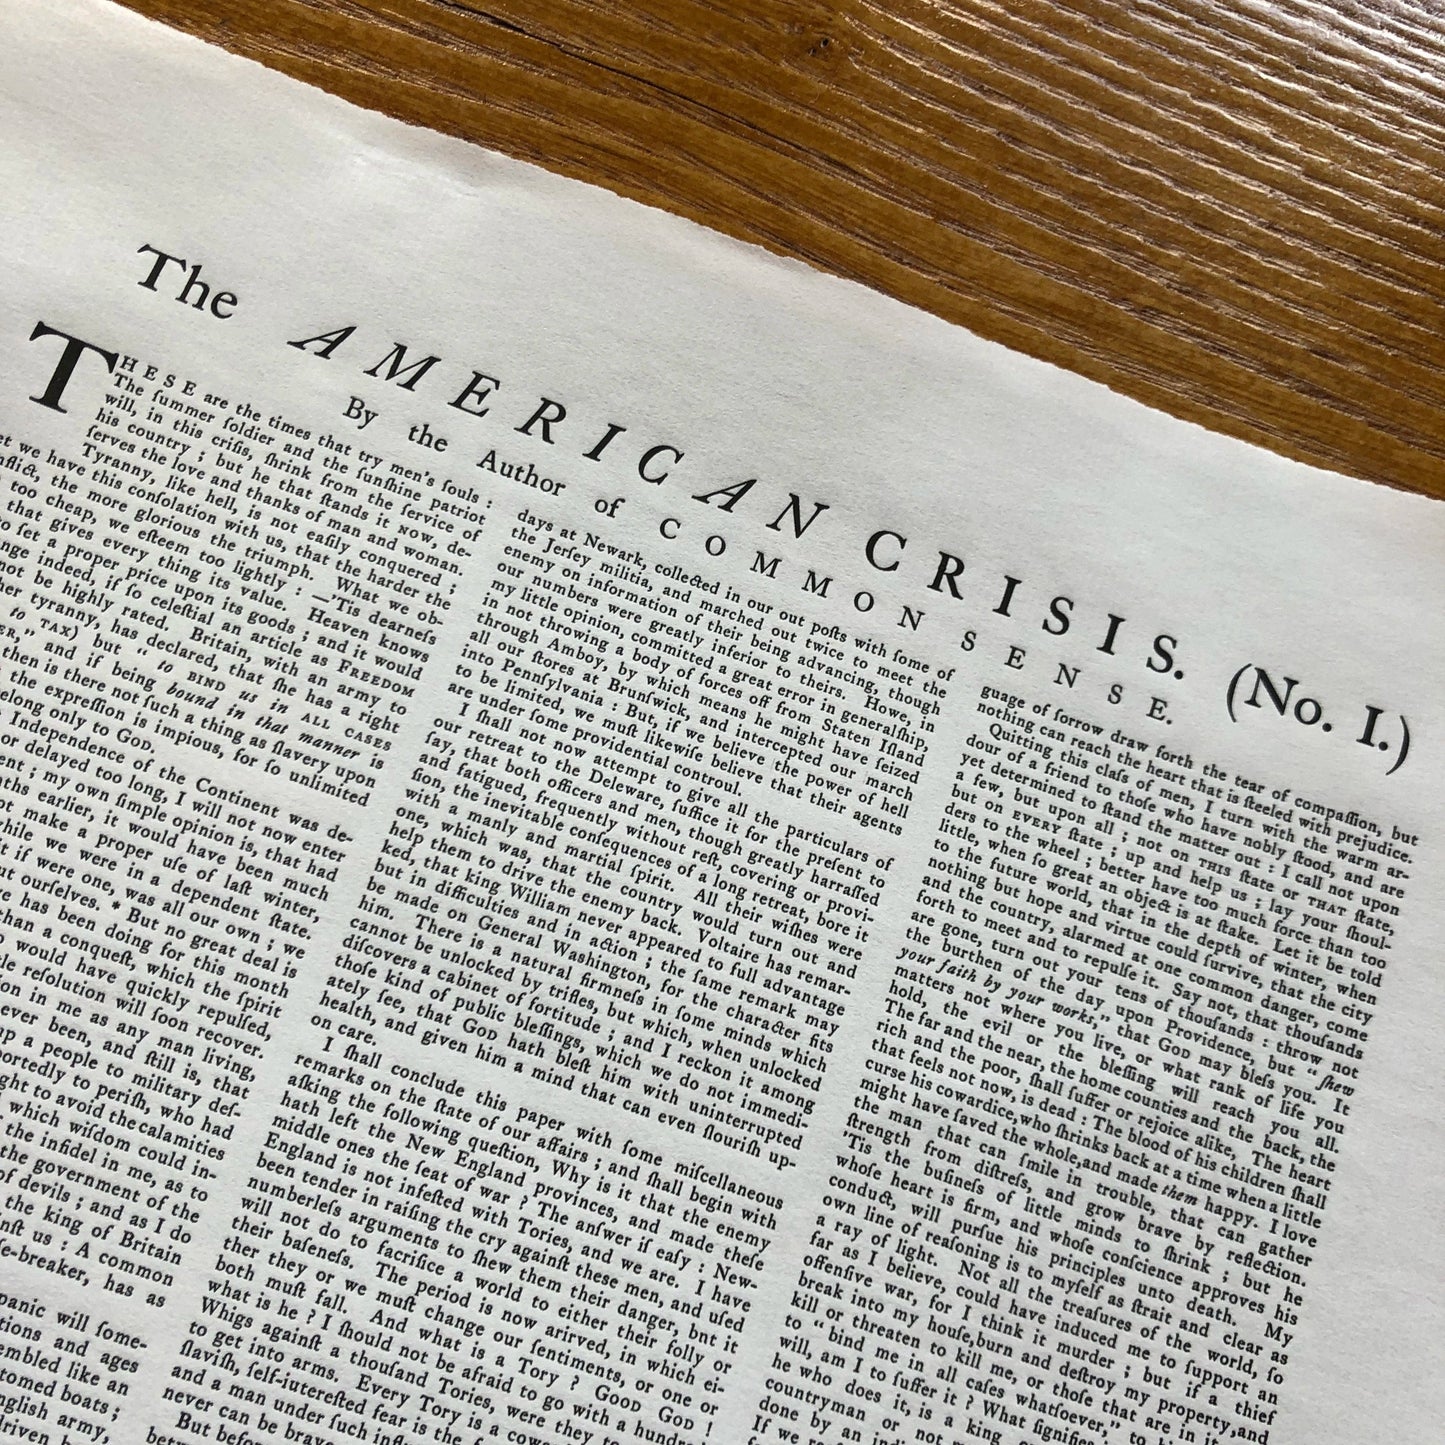 Top part of "The American Crisis" by Thomas Paine - "These are the times that try men’s souls" - Broadside printed in Boston from The History List store